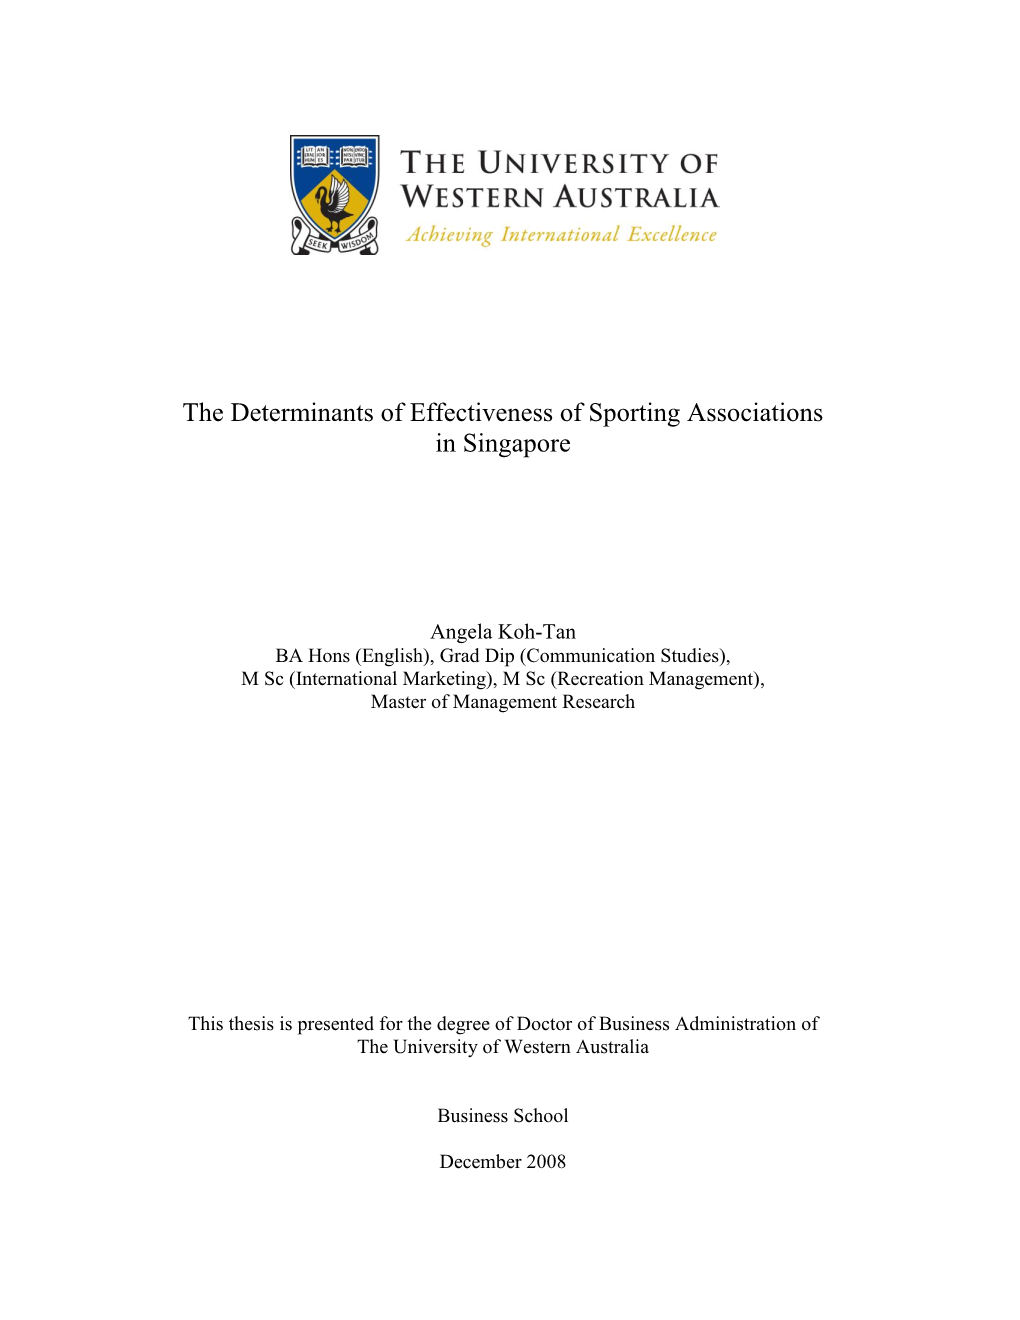 Determinants of Effectiveness of Sporting Associations in Singapore